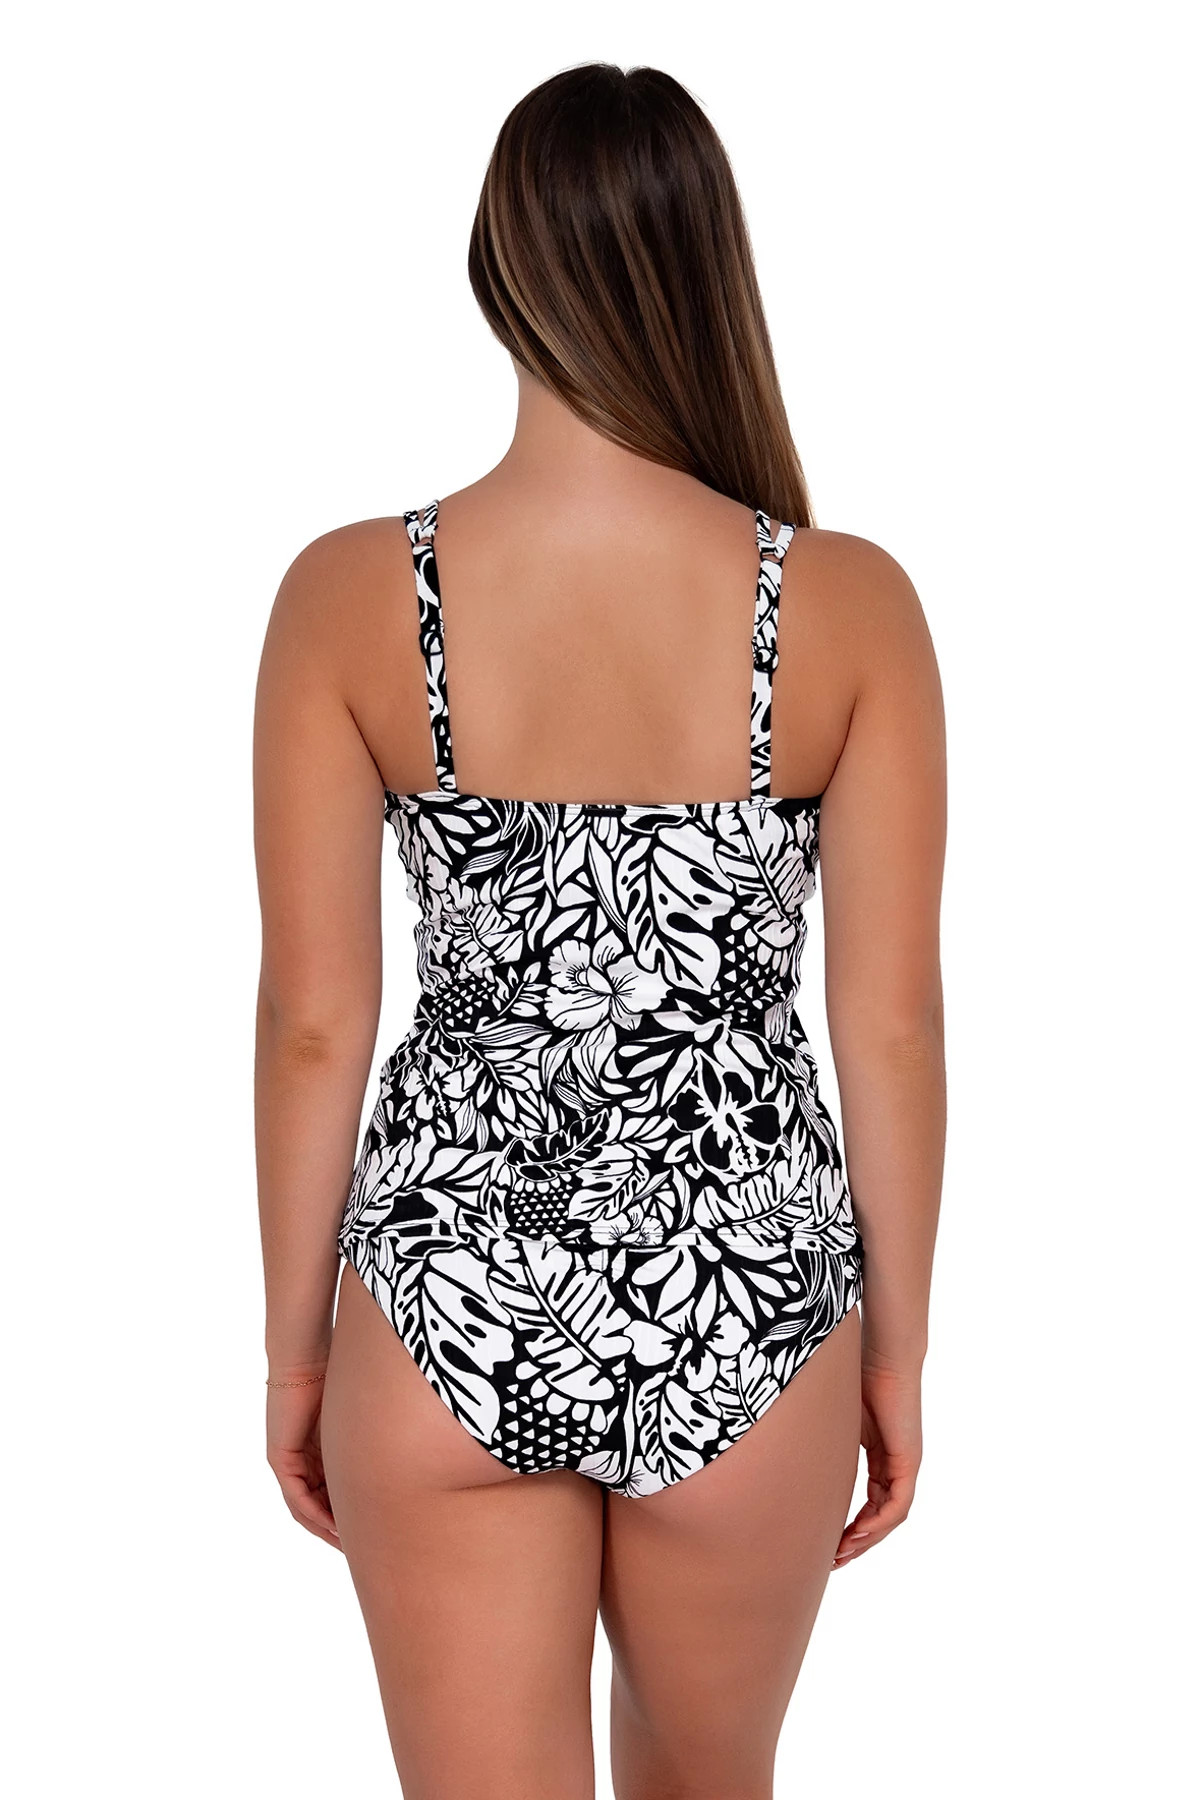 CARIBBEAN SEAGRASS TEXTURE Taylor Underwire Tankini Top (E-H Cup) image number 2